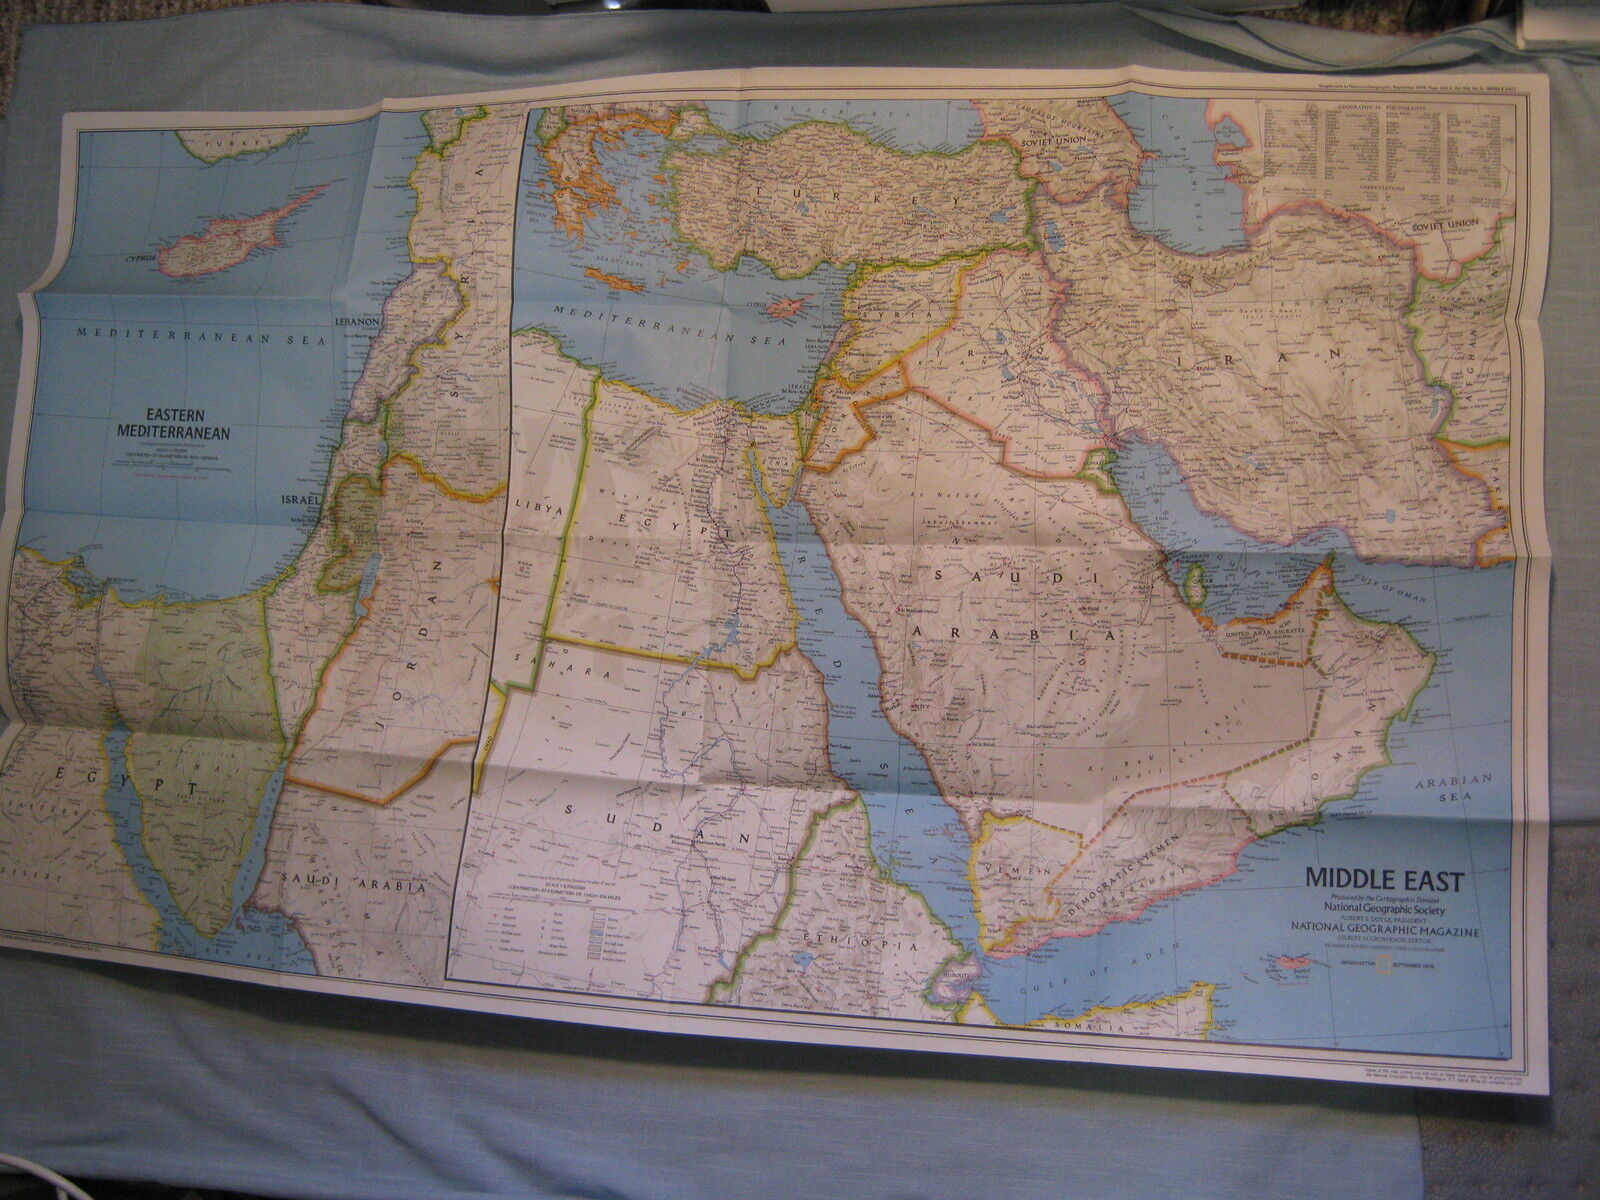 MIDDLE EAST MAP + EARLY CIVILIZATIONS HISTORY National Geographic September 1978